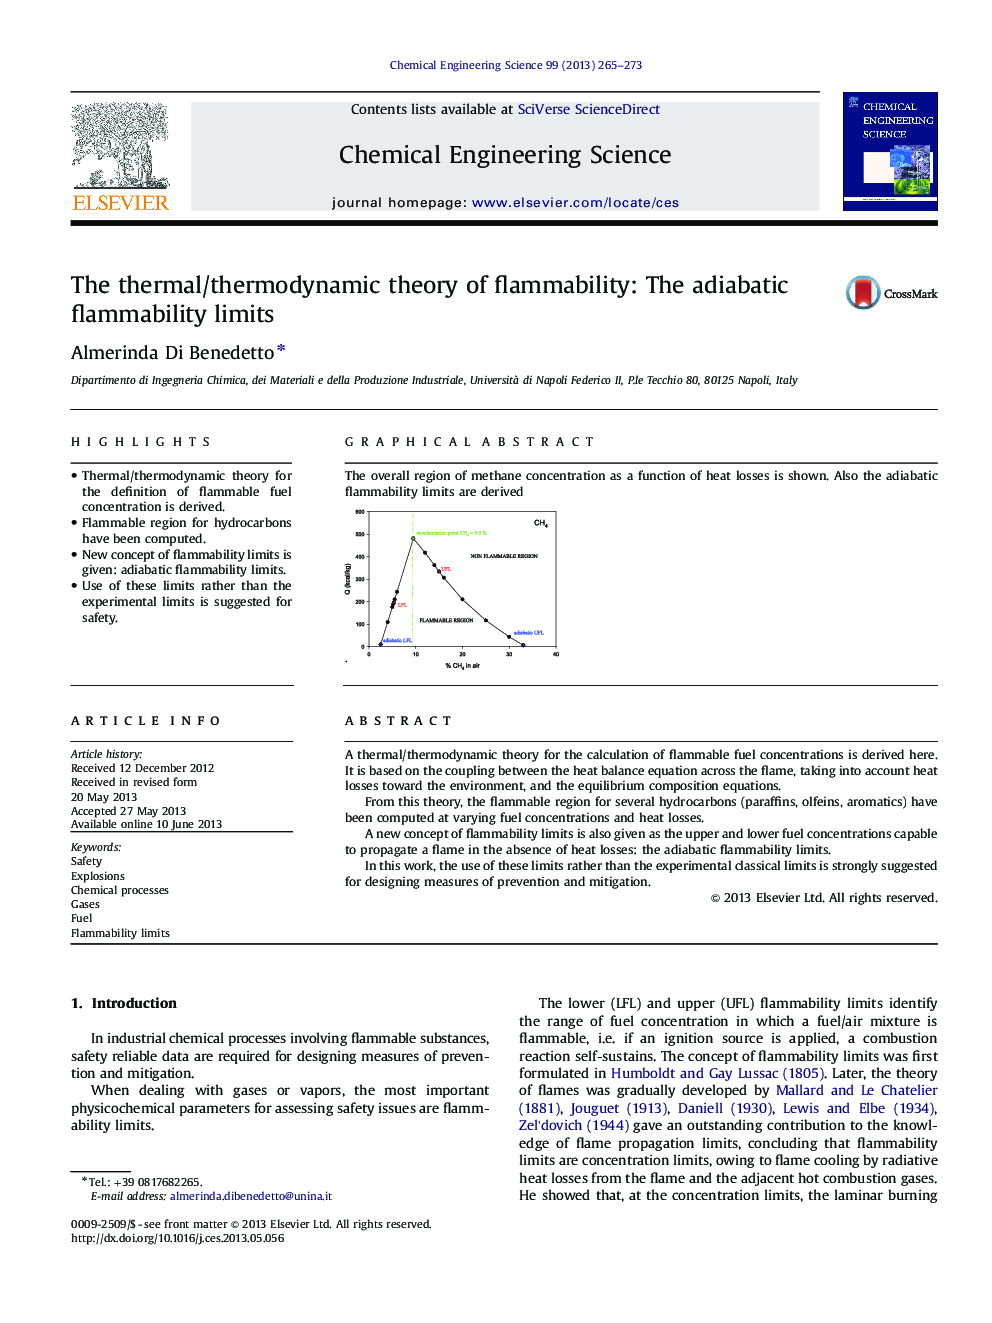 The thermal/thermodynamic theory of flammability: The adiabatic flammability limits